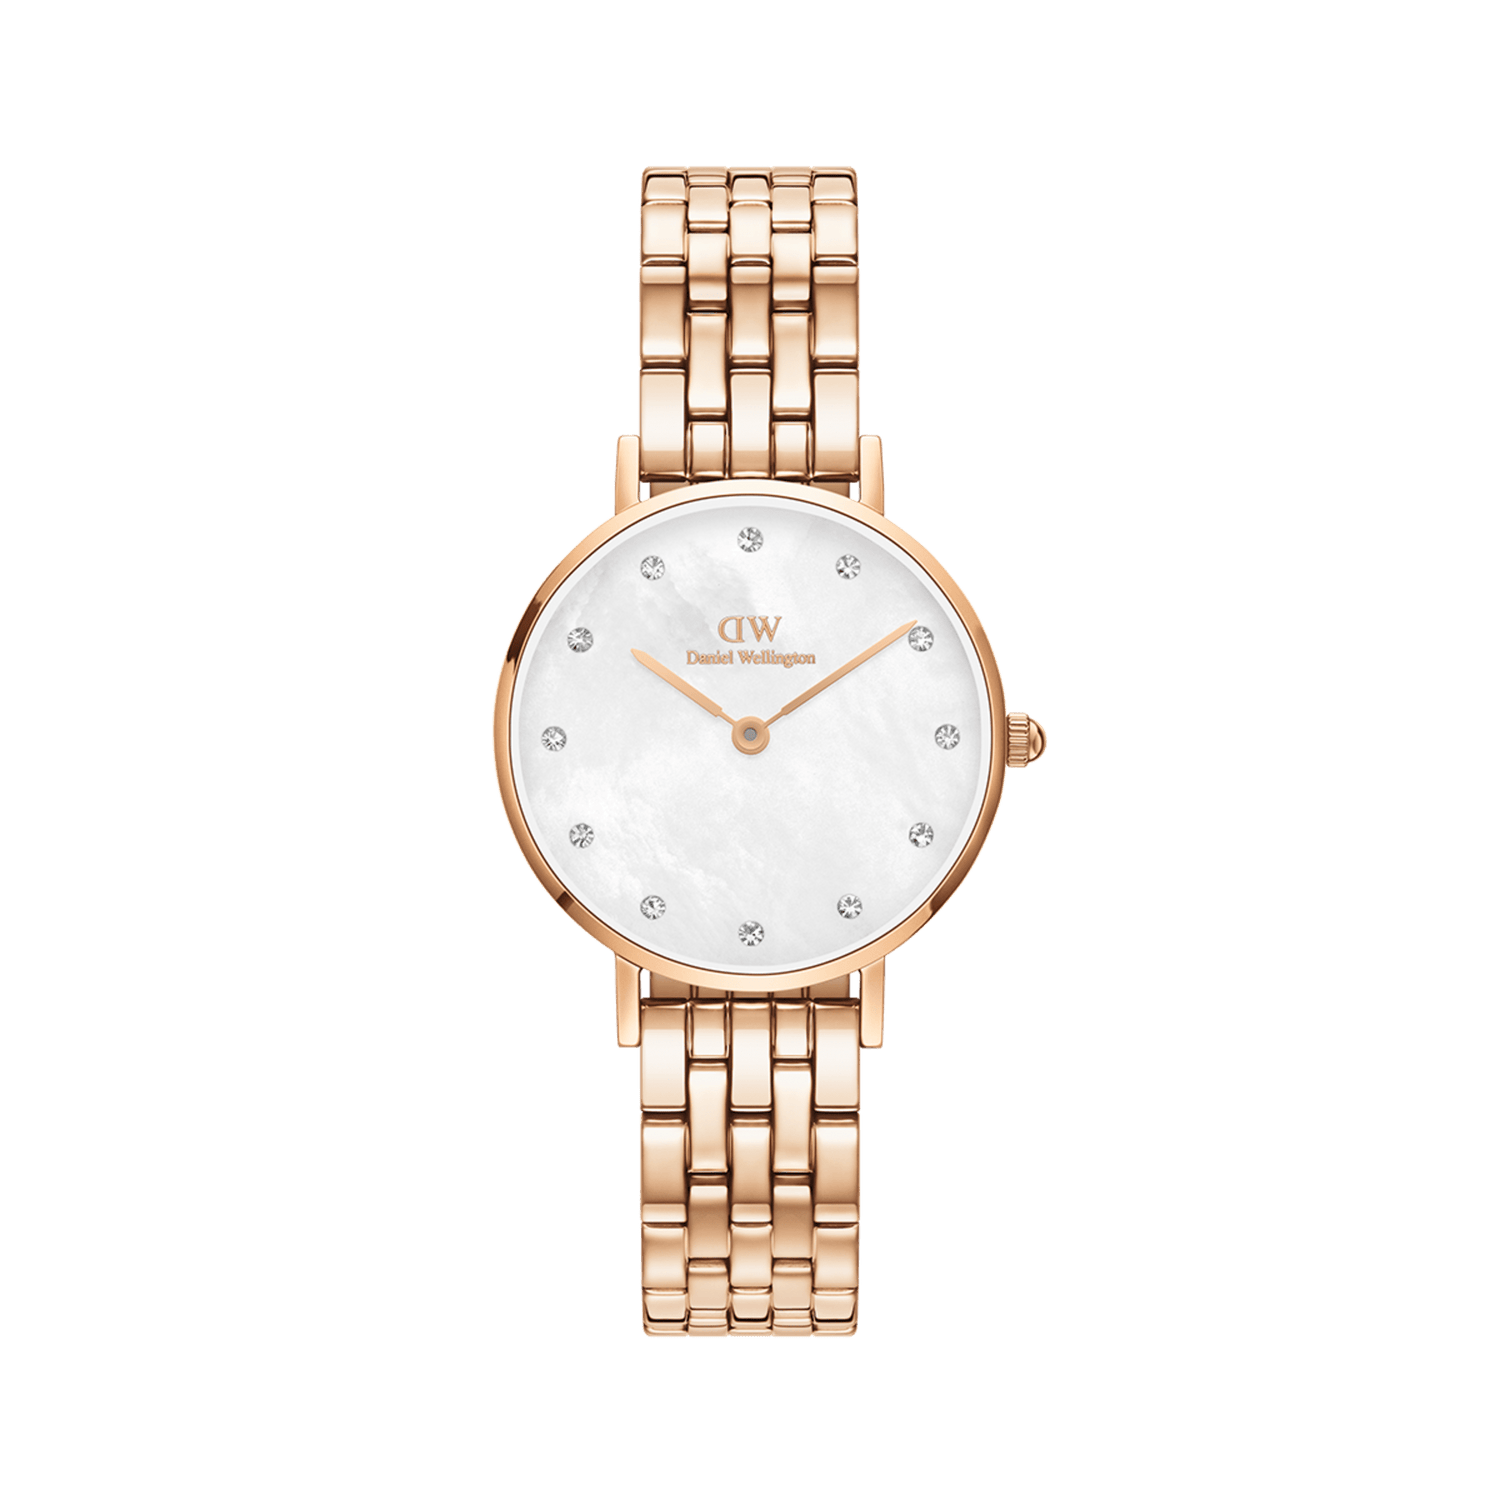 Petite Lumine - Watch with white mother of pearl dial | DW